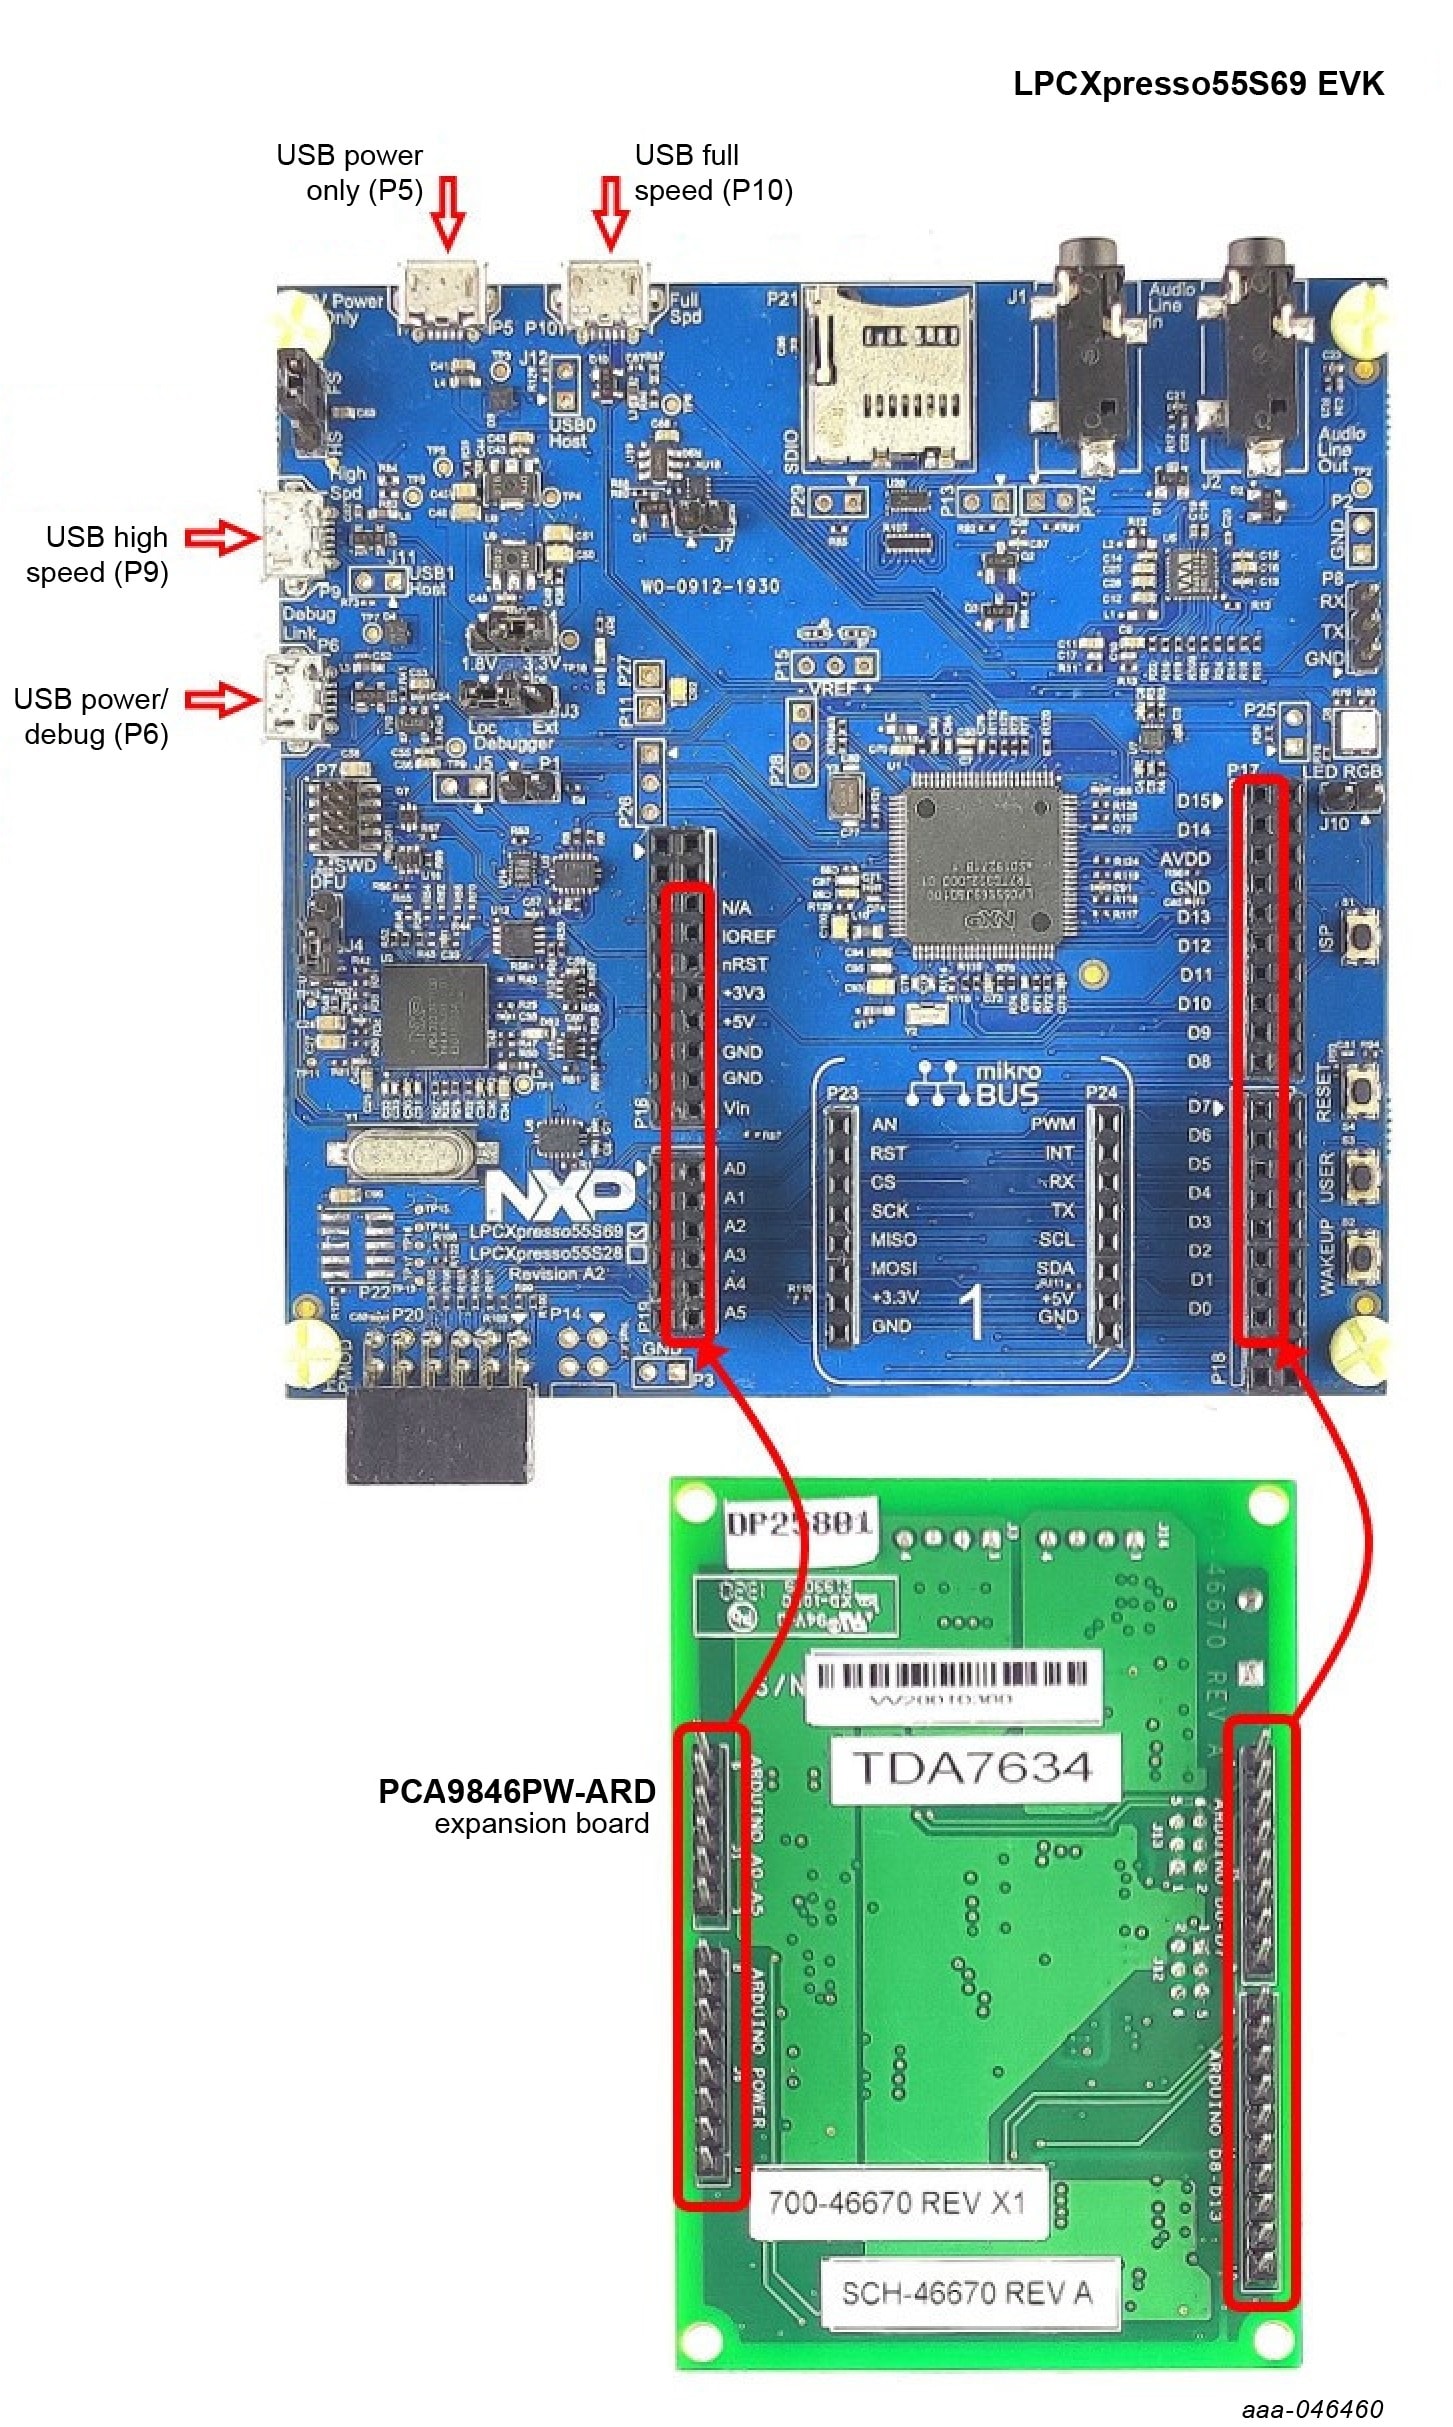 Figure 3. PCA9846PW-ARD daughter board and LPCXpresso55S69 mother board, before starting